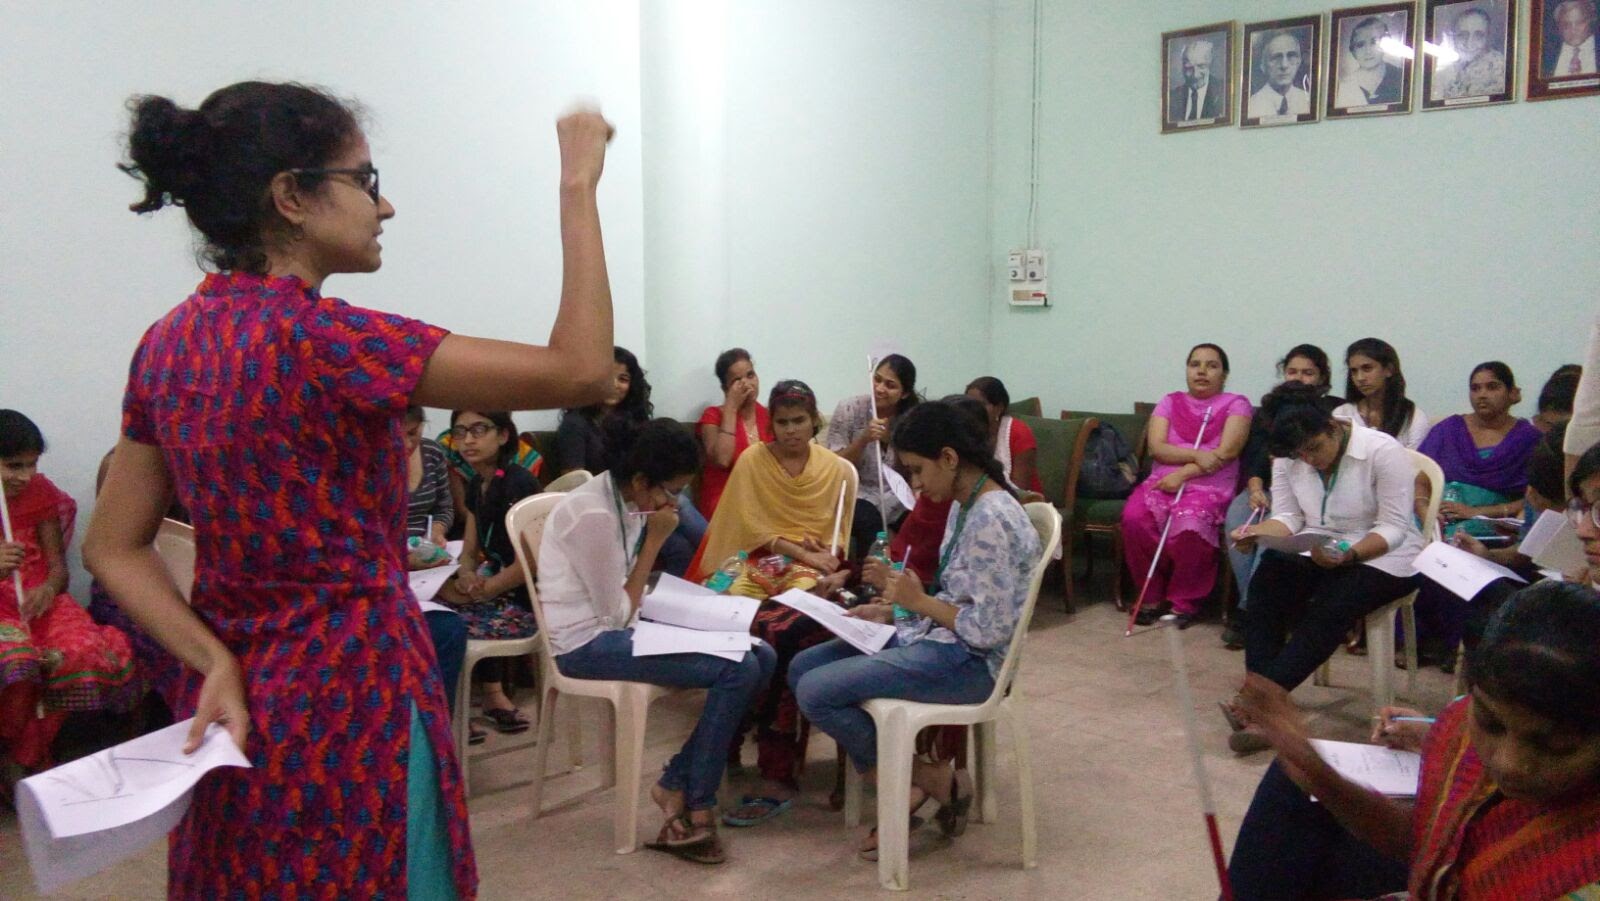 Anu facilitating a session during the My Access Campaign in December 2015